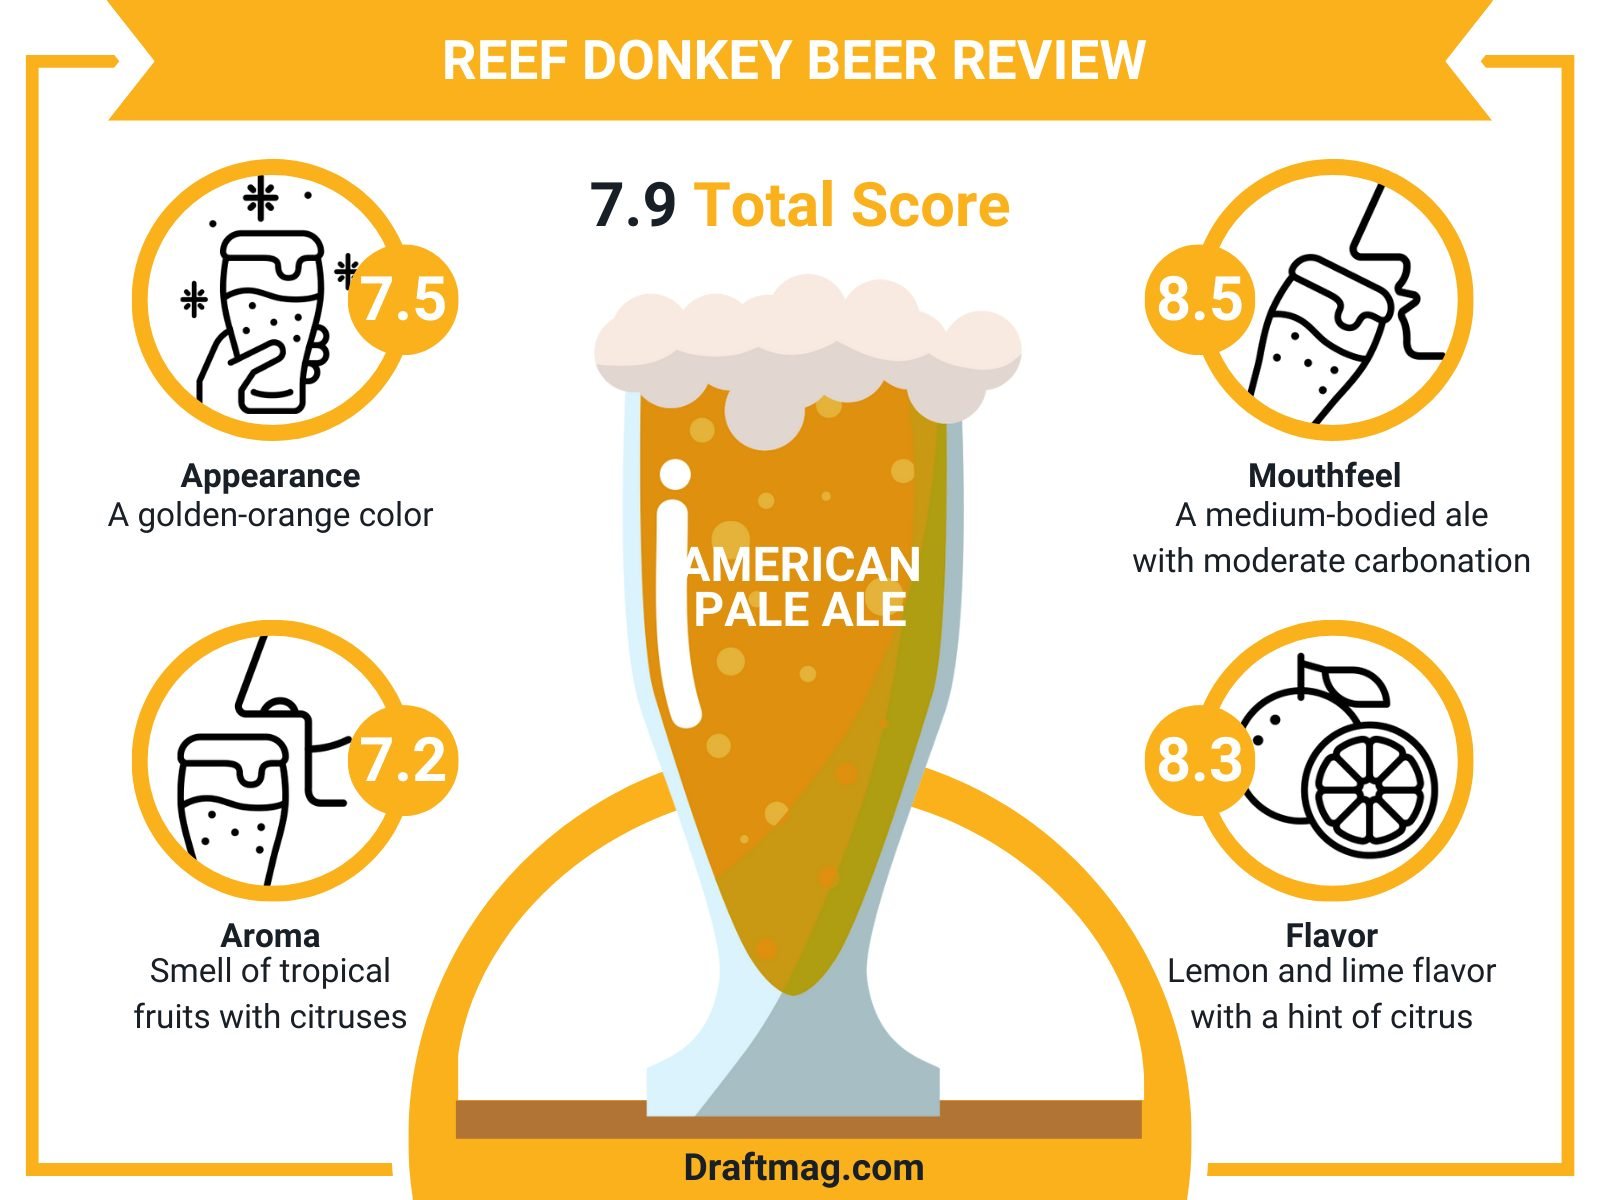 Reef Donkey Beer Review Infographic